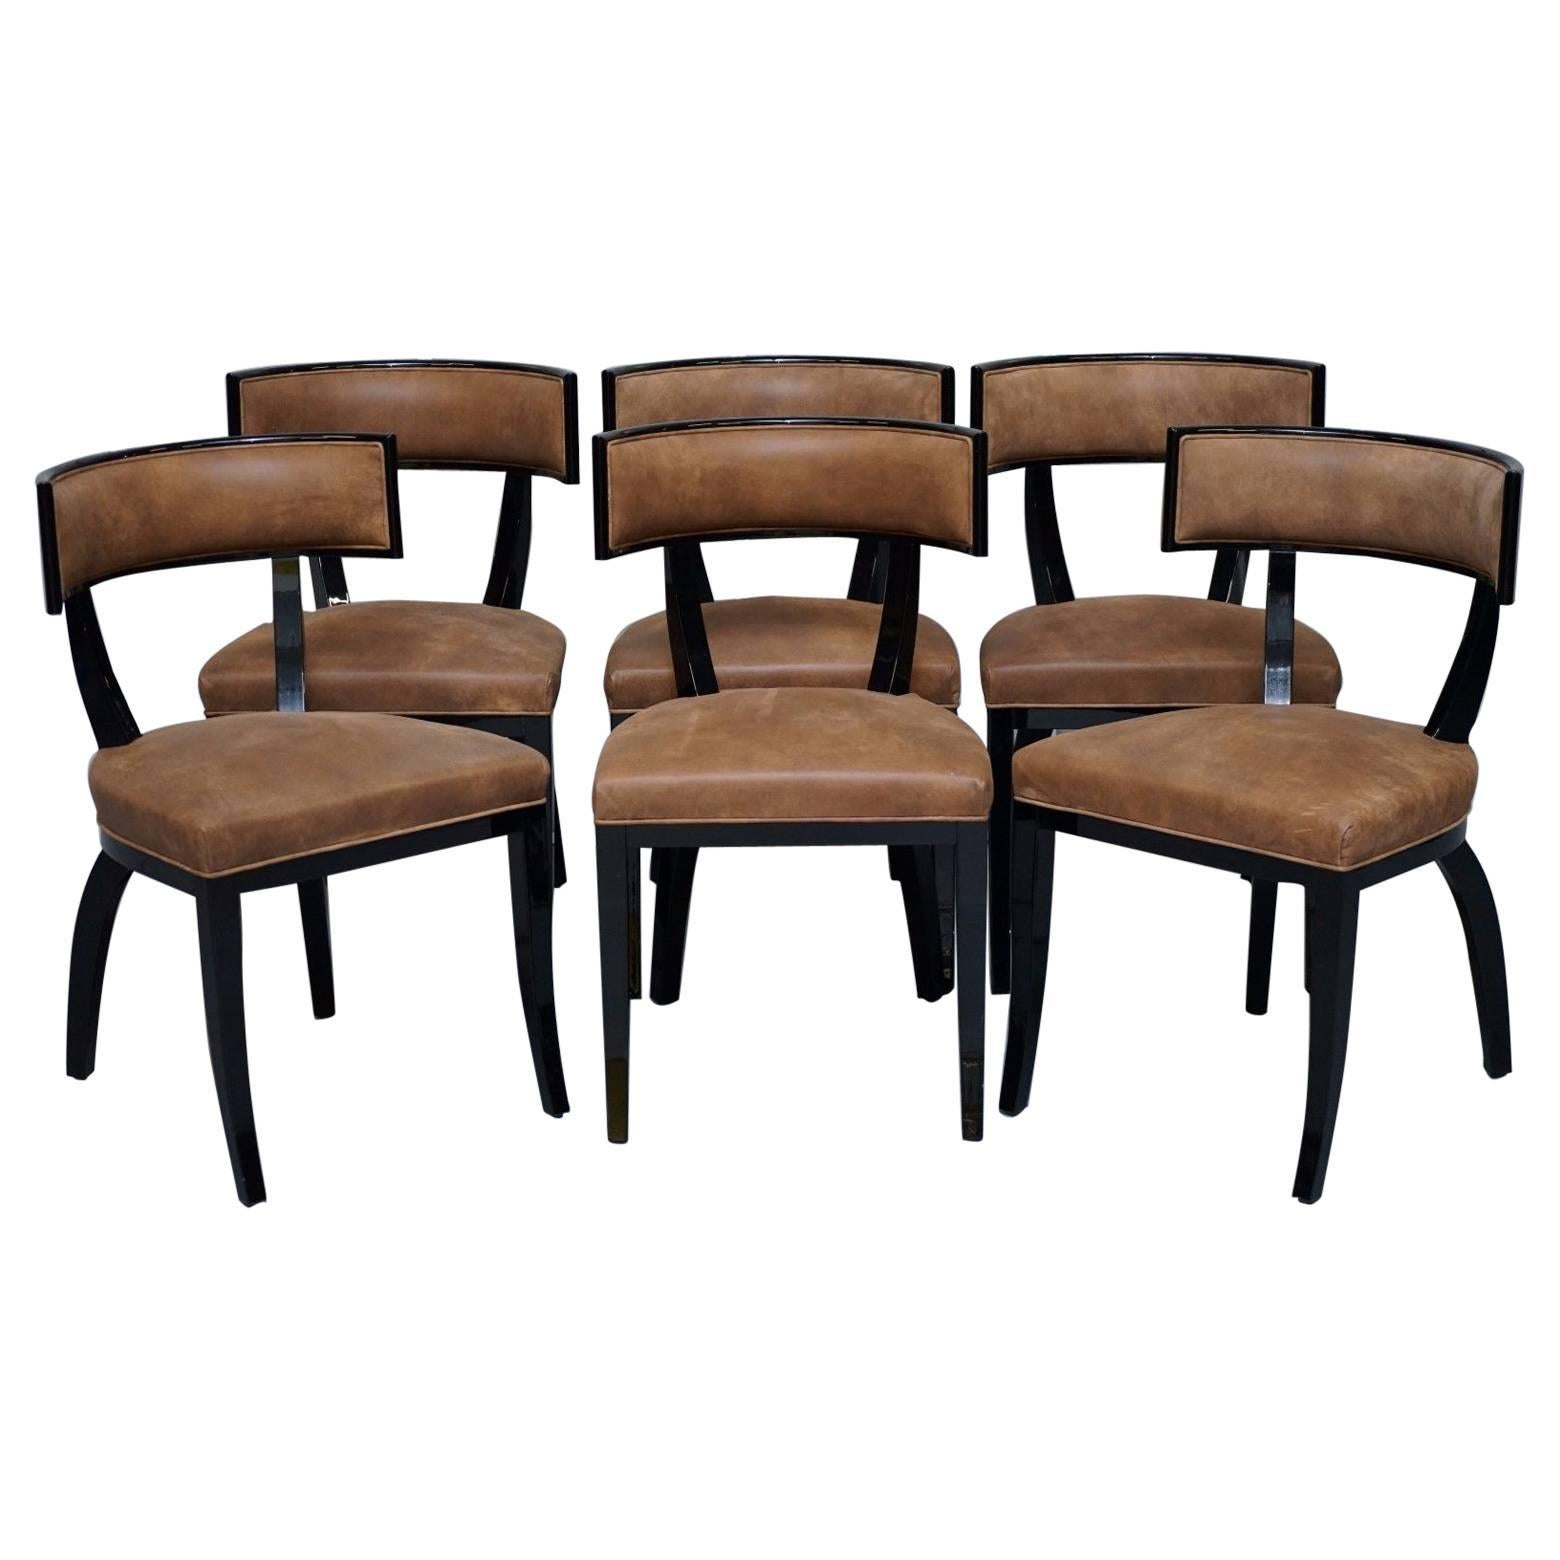 Set of Six New IPE Cavalli Nevella Vertina Italy Dining Chairs Suede Display Use